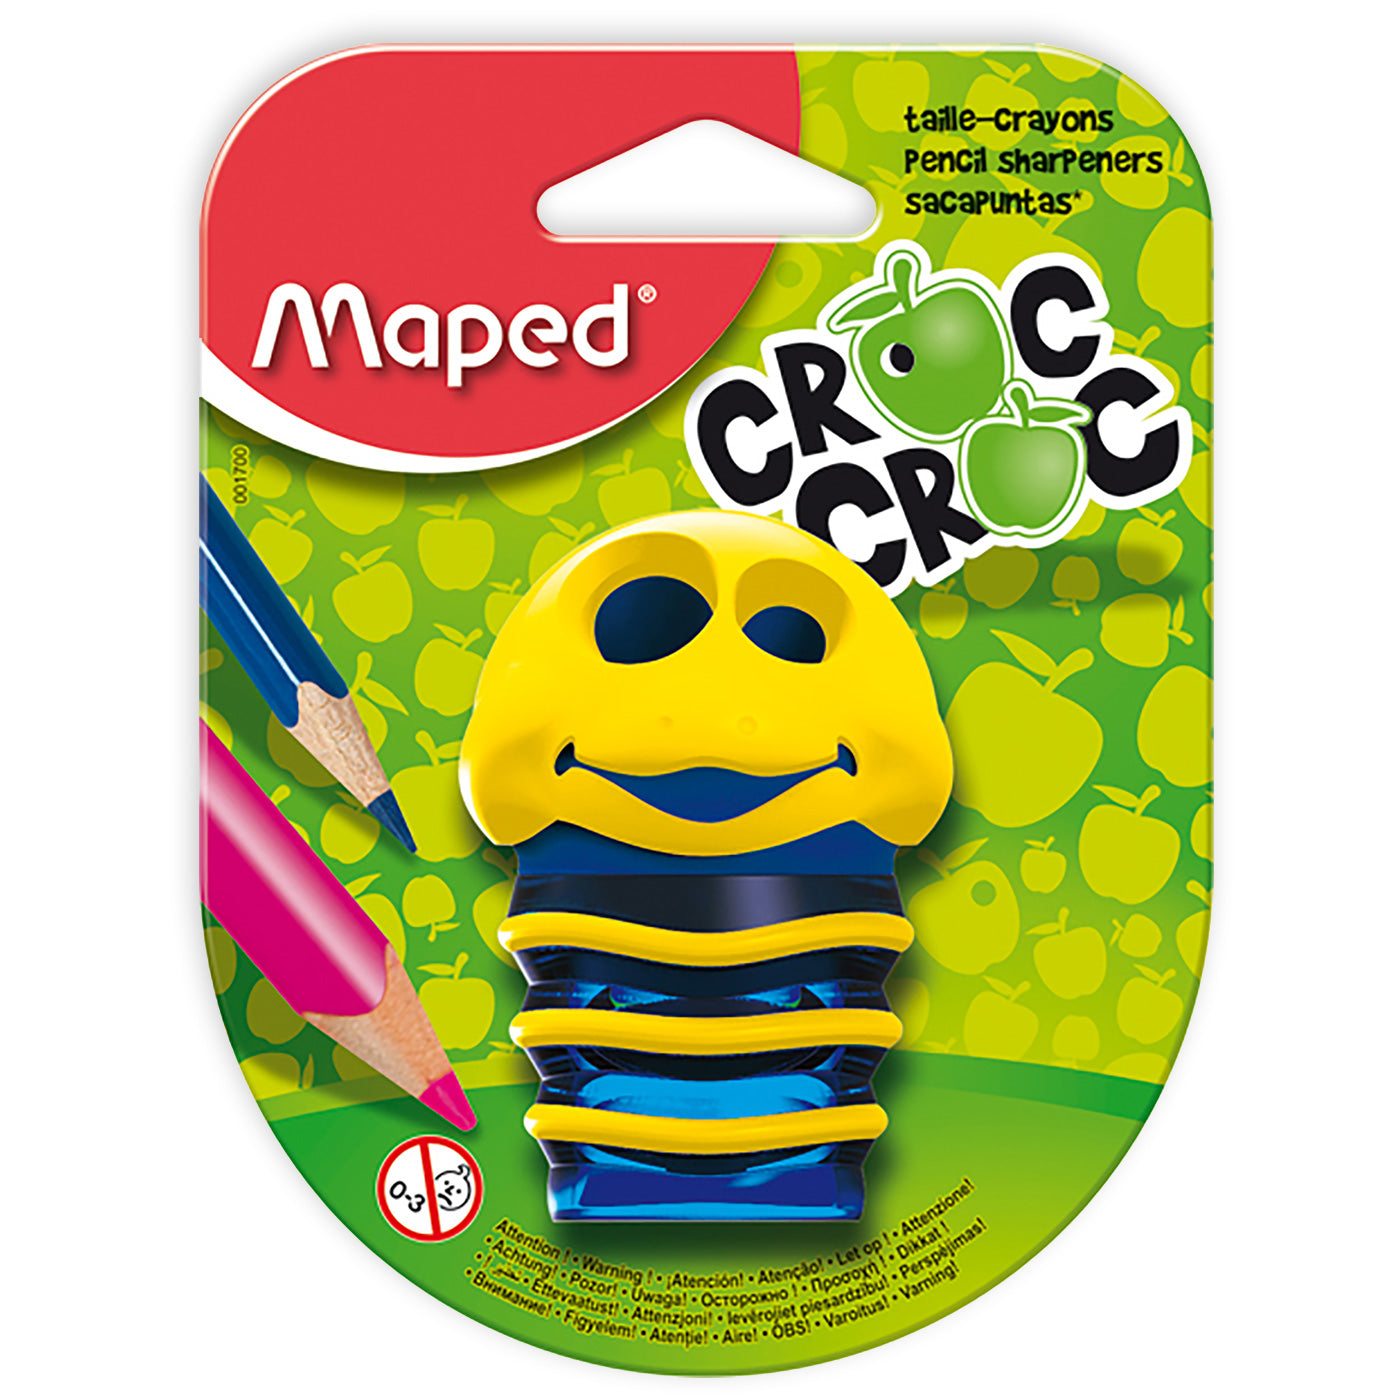 Maped Croc Croc 2 Hole Sharpener with Expandable Cannister